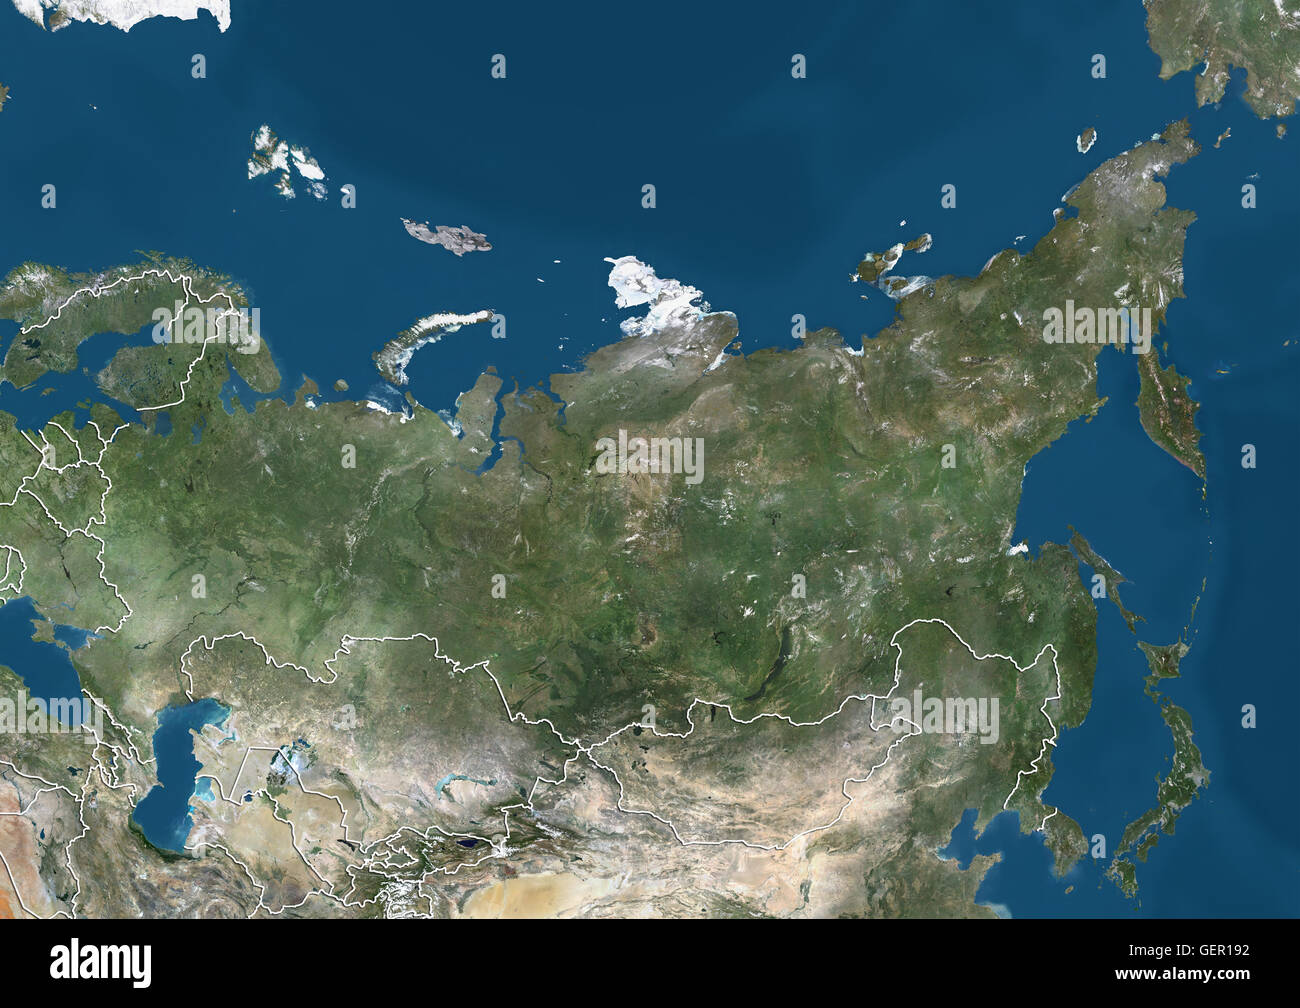 Satellite view of Russia, with neighbouring countries Belarus, Kazakhstan and Mongolia (with country boundaries). This image was compiled from data acquired by Landsat satellites. Stock Photo